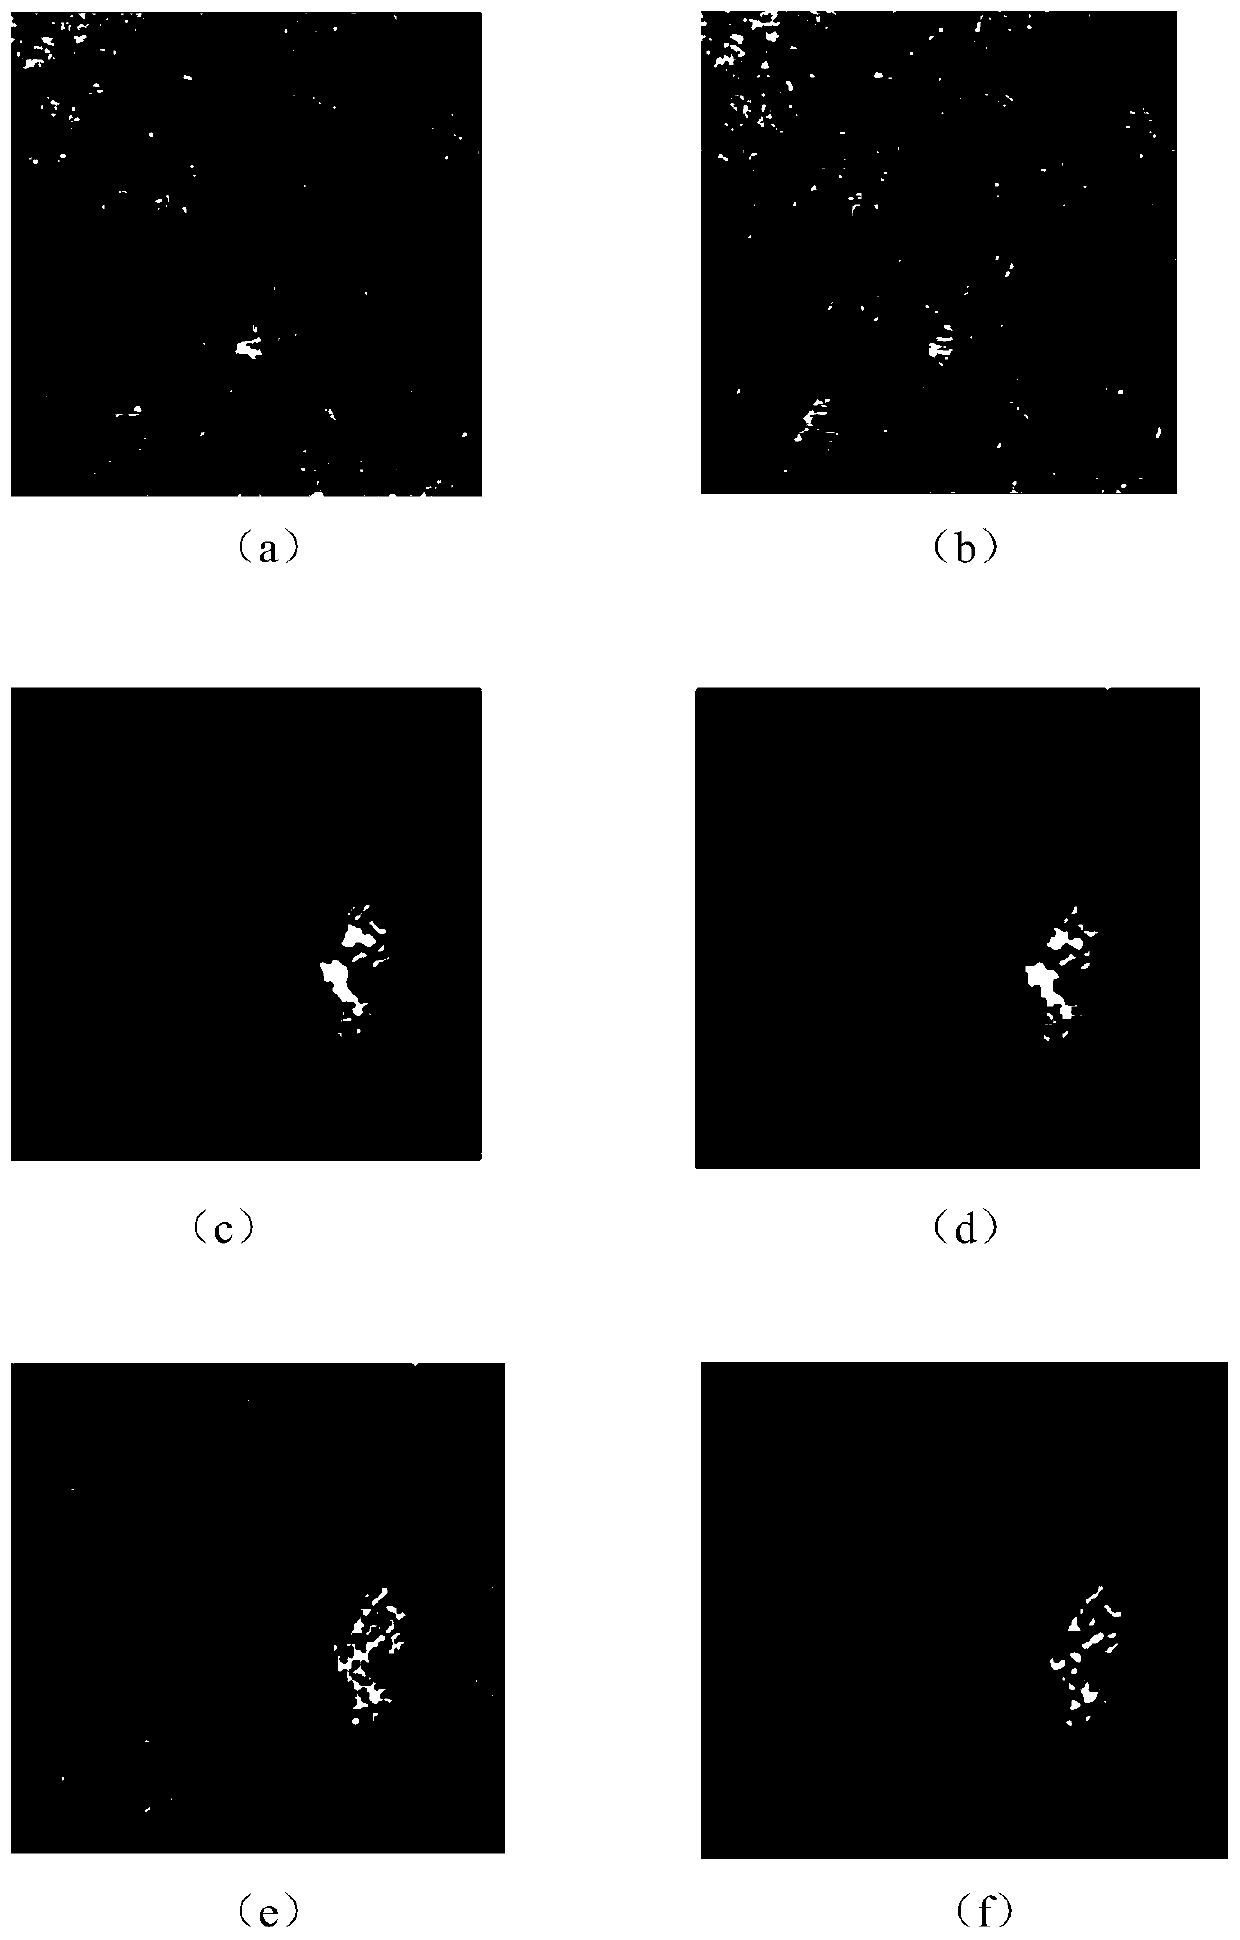 Algorithm for detection of changing regions in sar images based on neighborhood ratio and self-paced learning